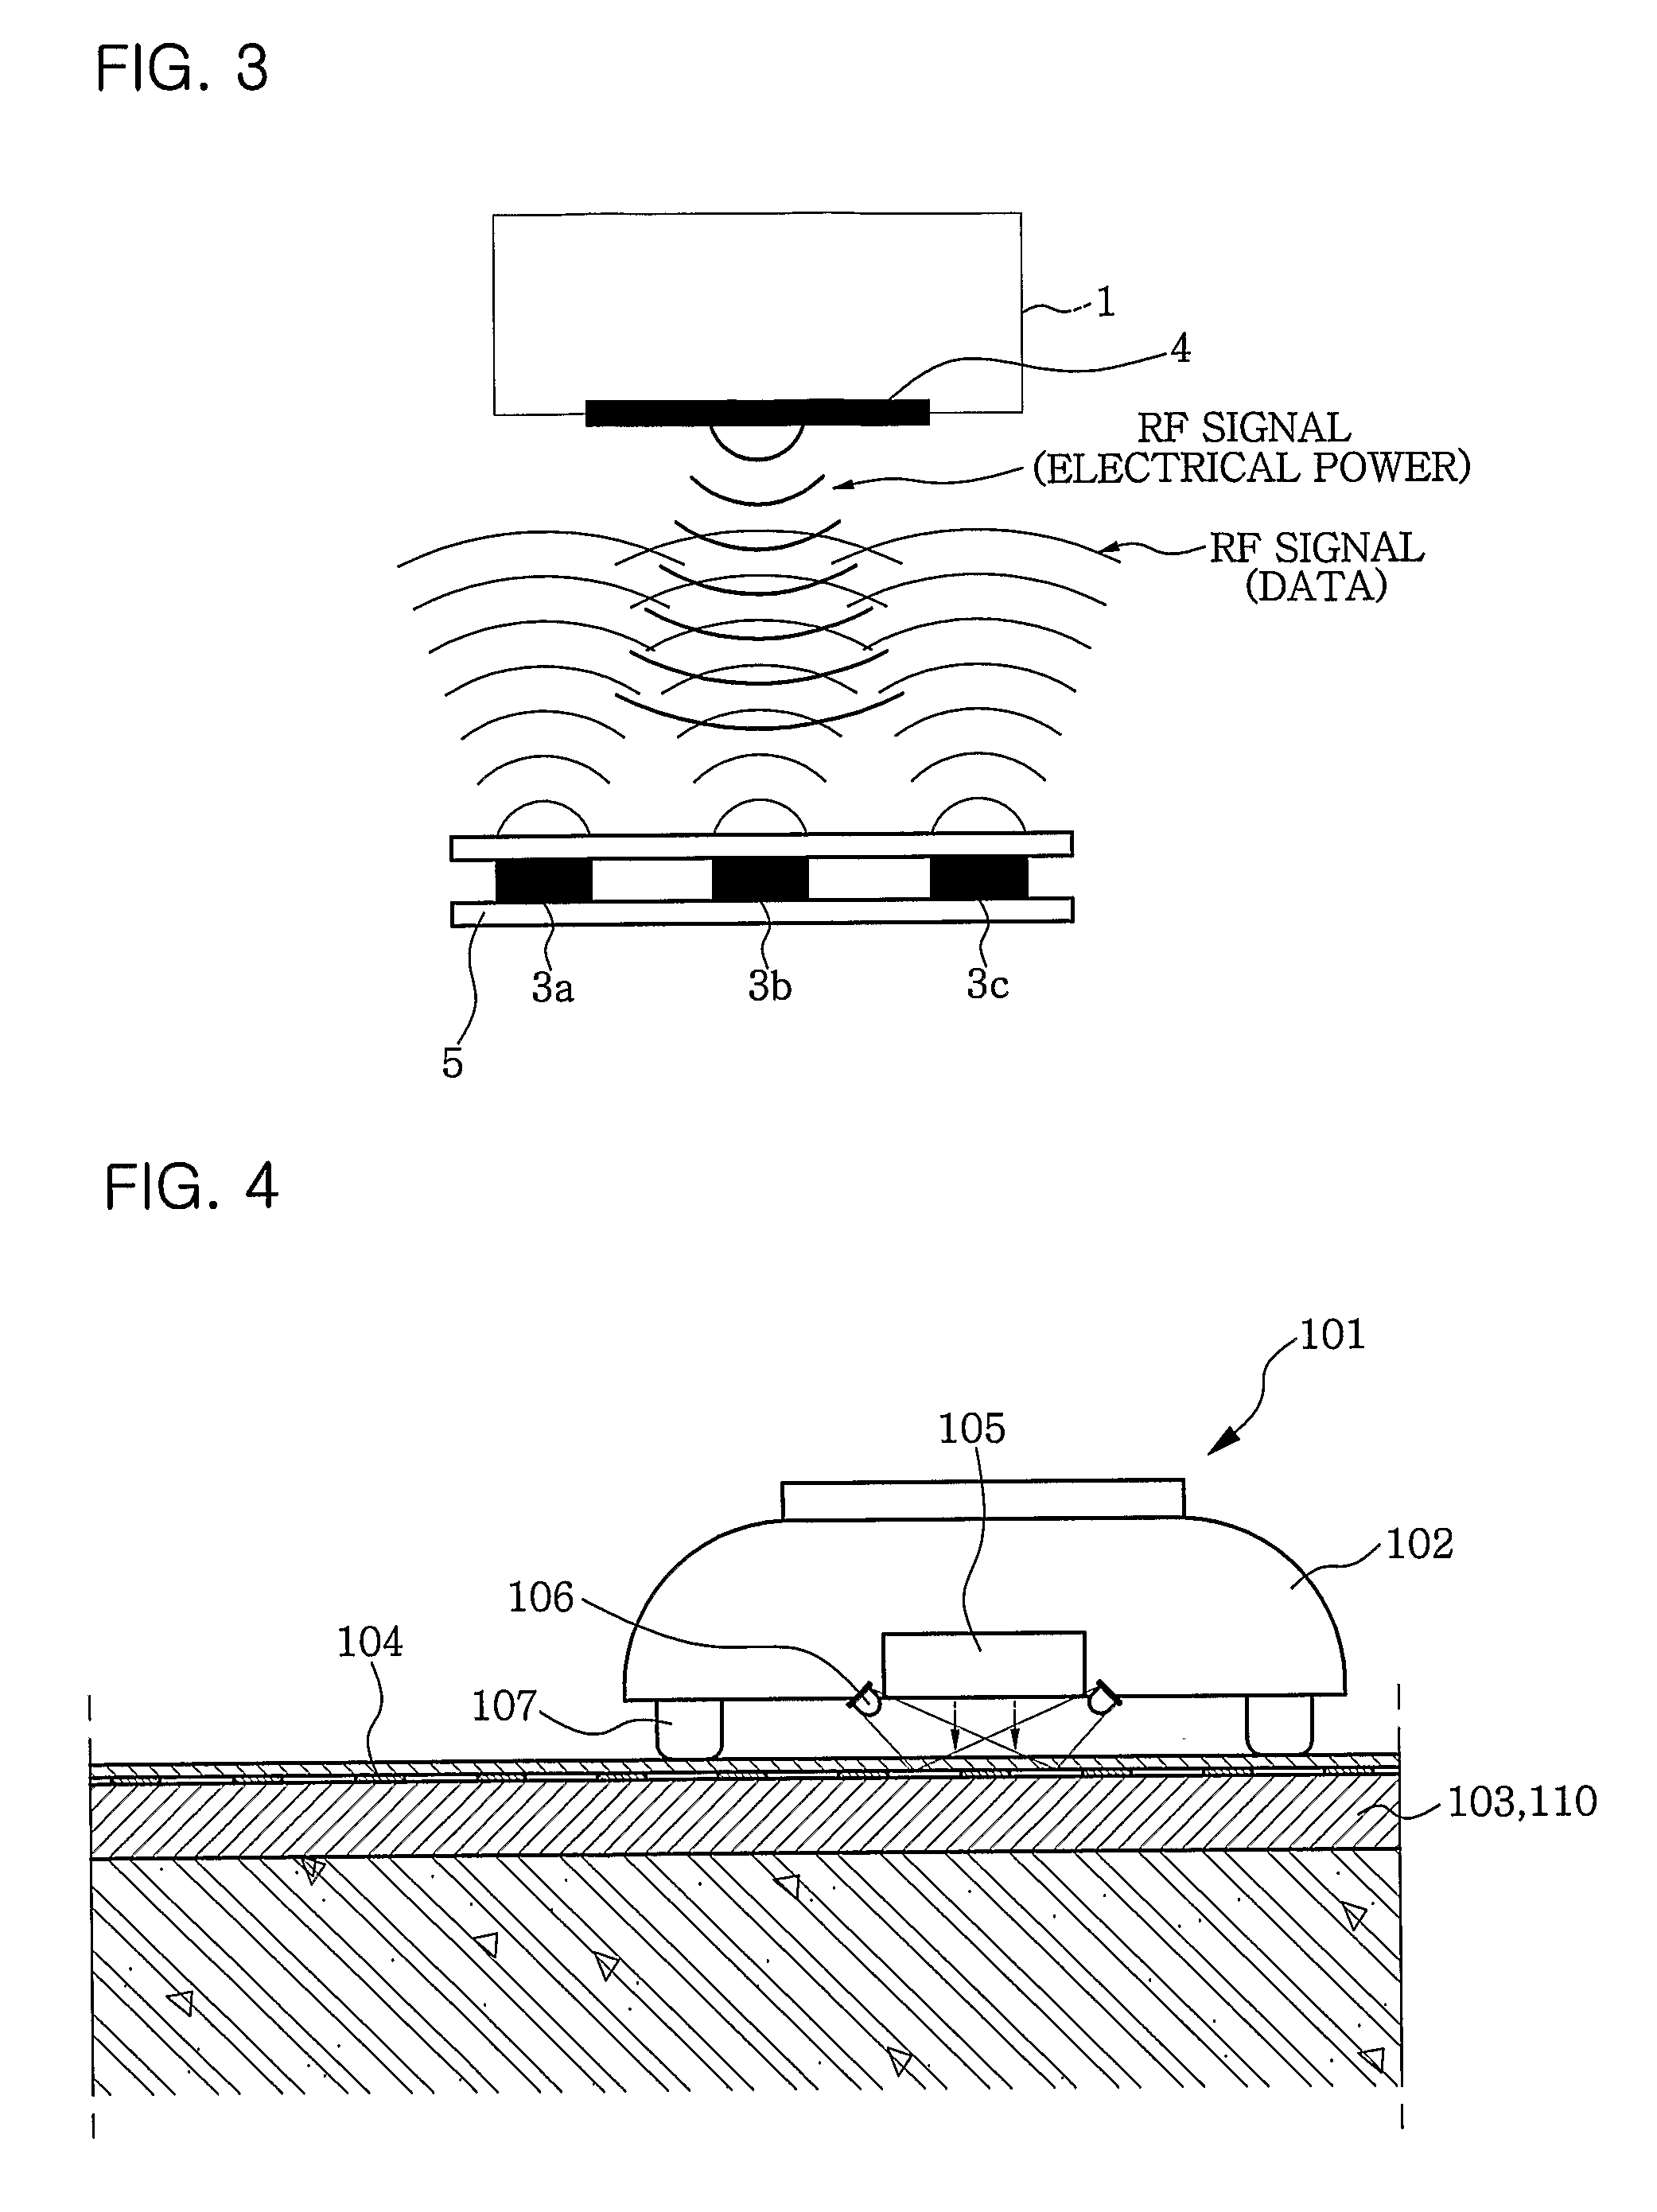 Navigation system for position self control robot and floor materials for providing absolute coordinates used thereof